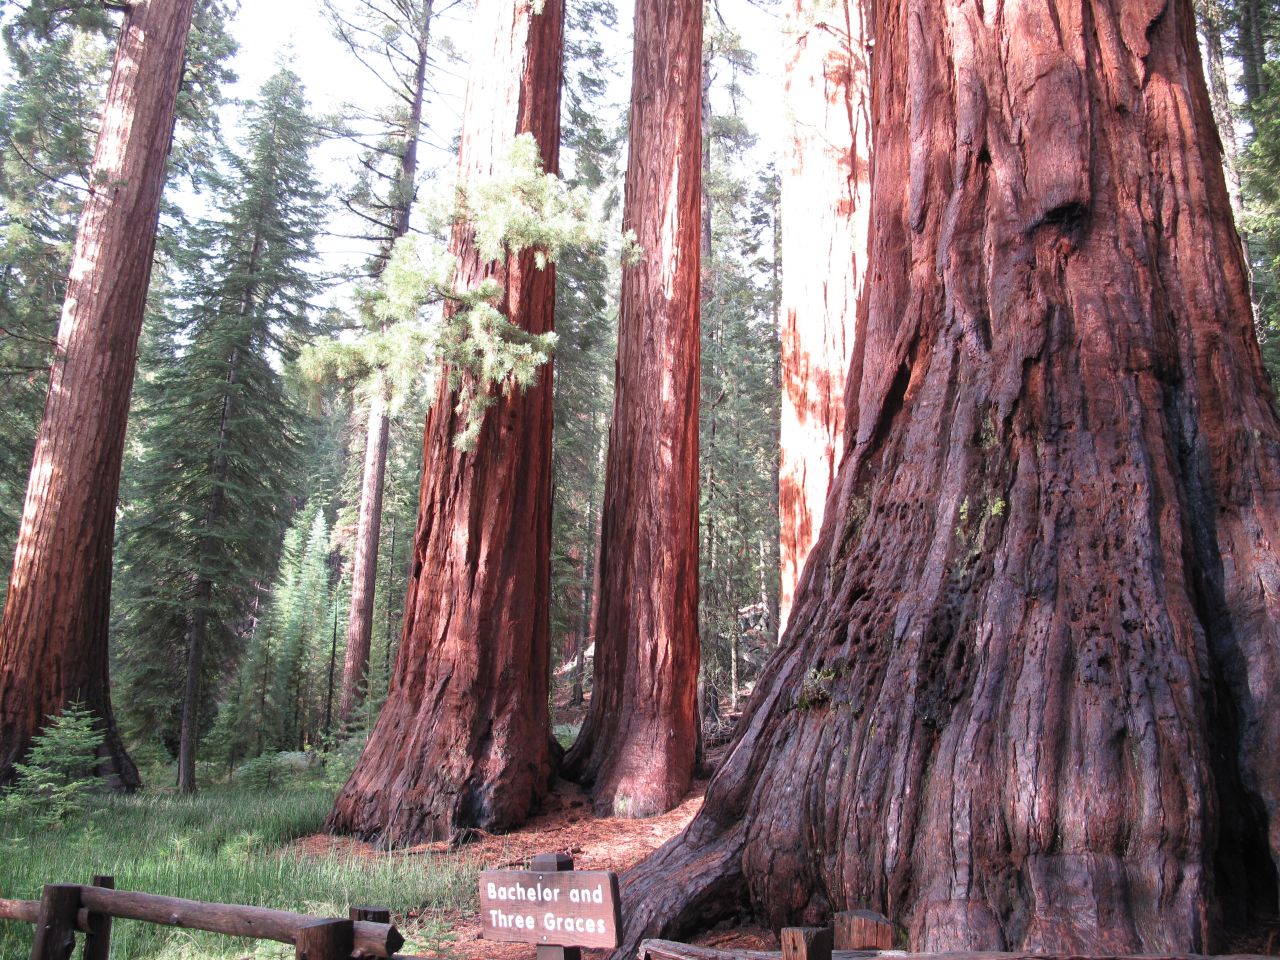 The Mariposa Grove of Giant Sequoias contains imposing trees known as the Bachelor and the Three Graces. 